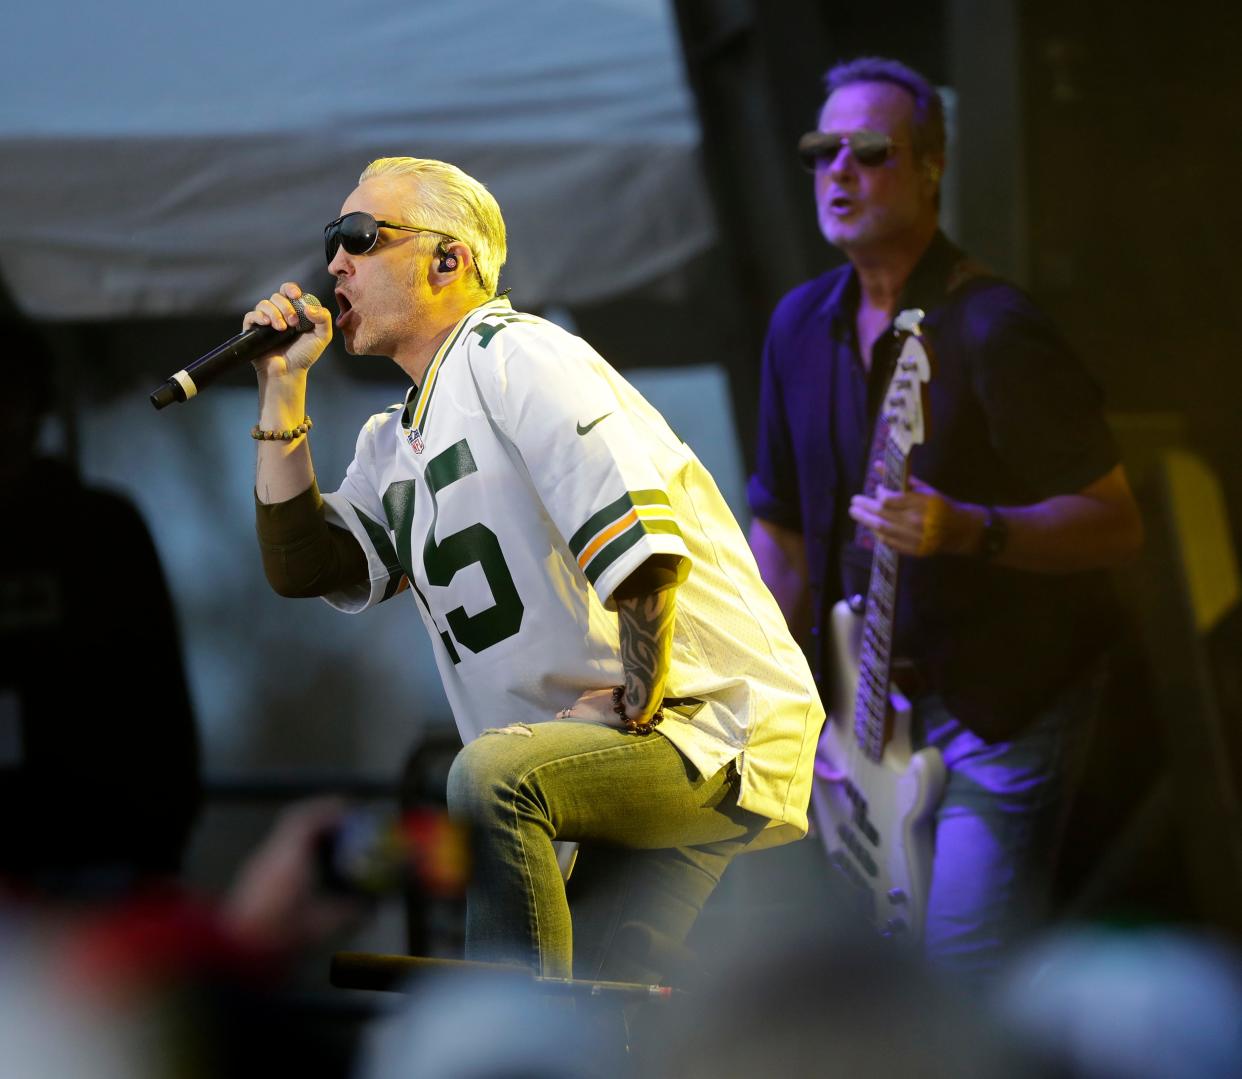 Stone Temple Pilots, who performed outside Lambeau Field last fall for Green Bay Packers' Kickoff Weekend concert, are playing the Greenville Lions Catfish Concert this summer.